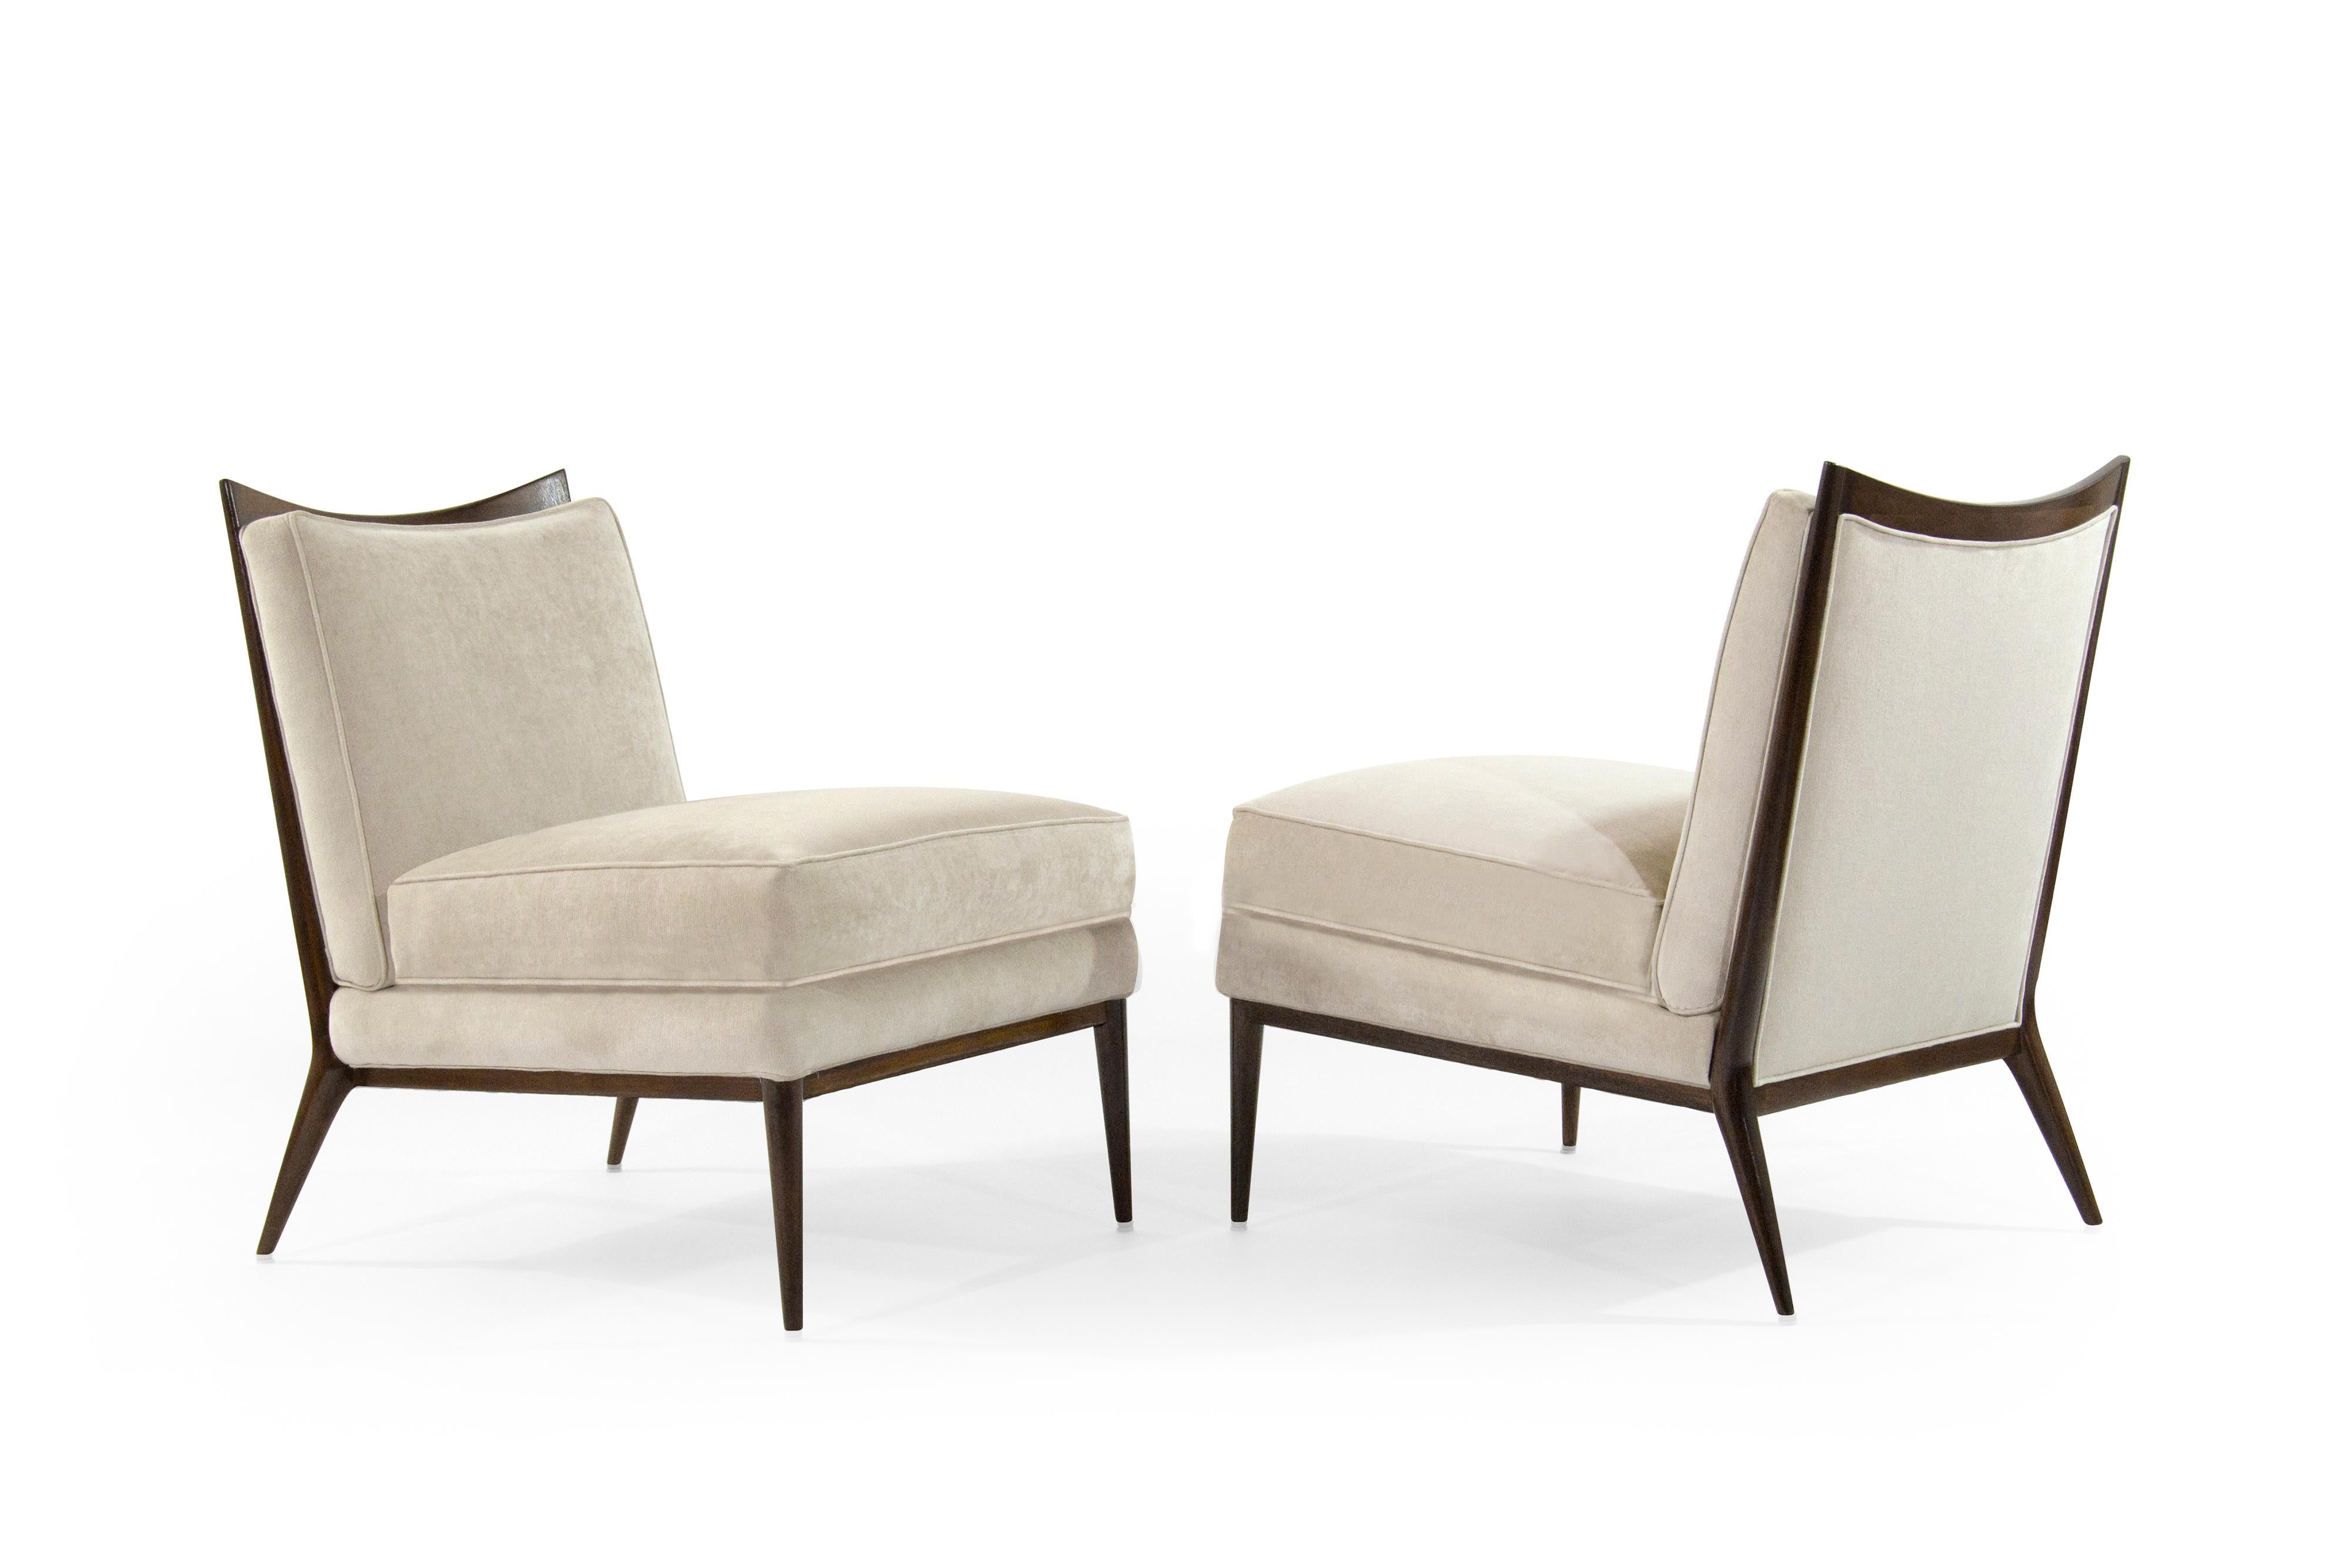 American Wanut Frame Slipper Chairs by Paul McCobb for Directional